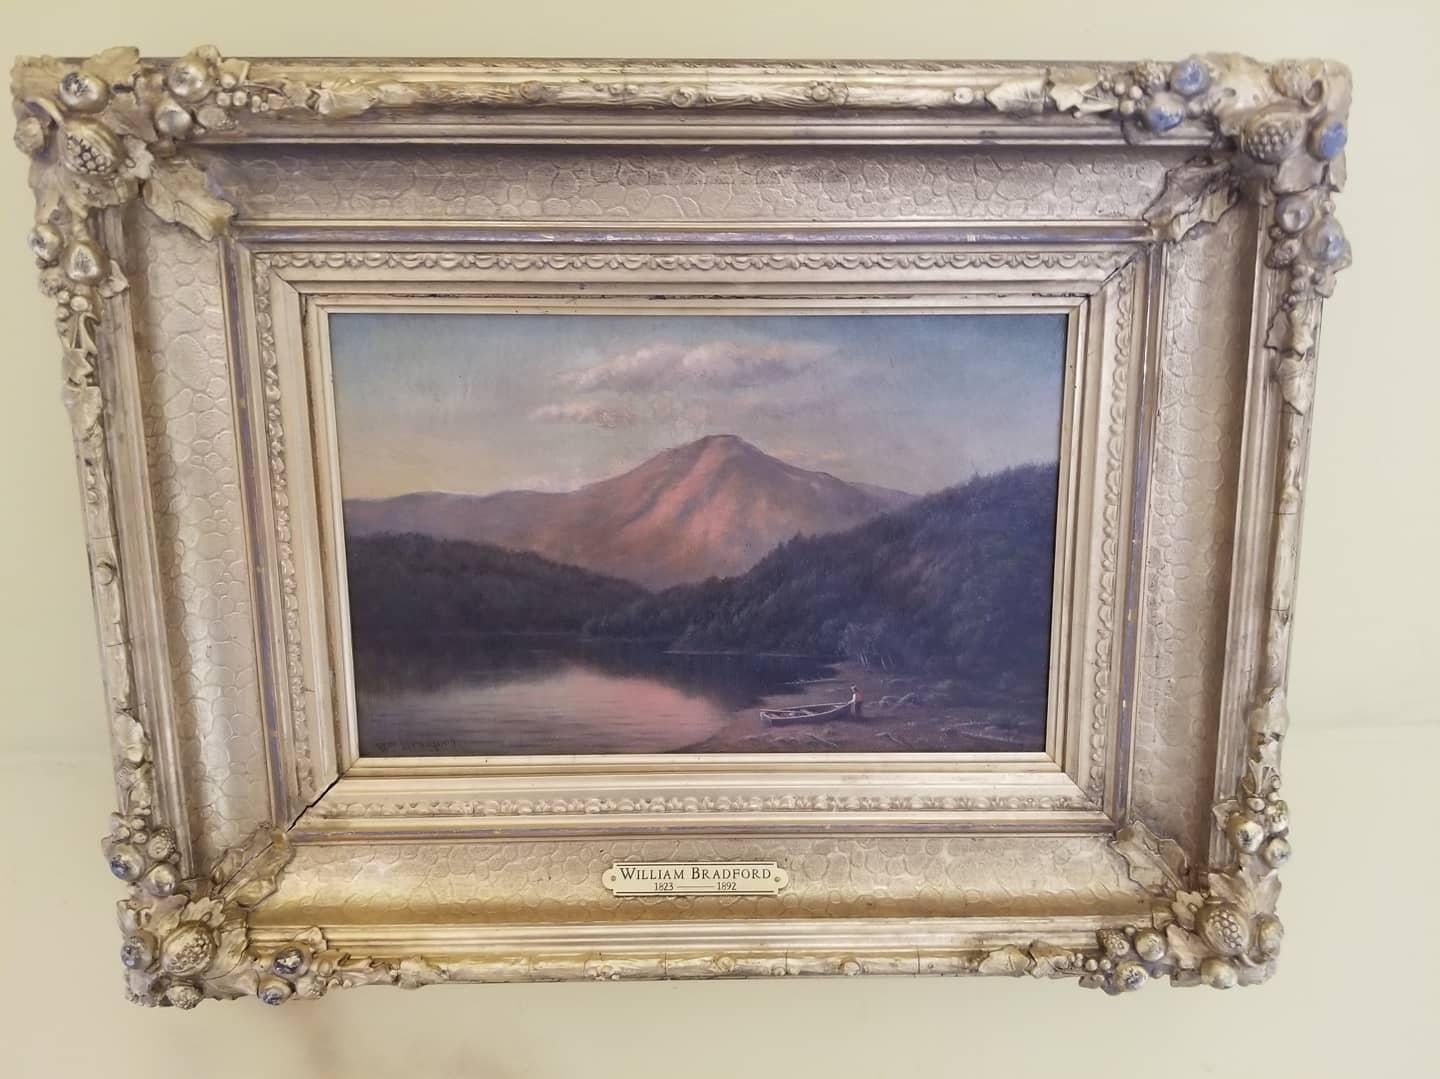 Whiteface Mt, Lake Placid NY - Painting by William Bradford